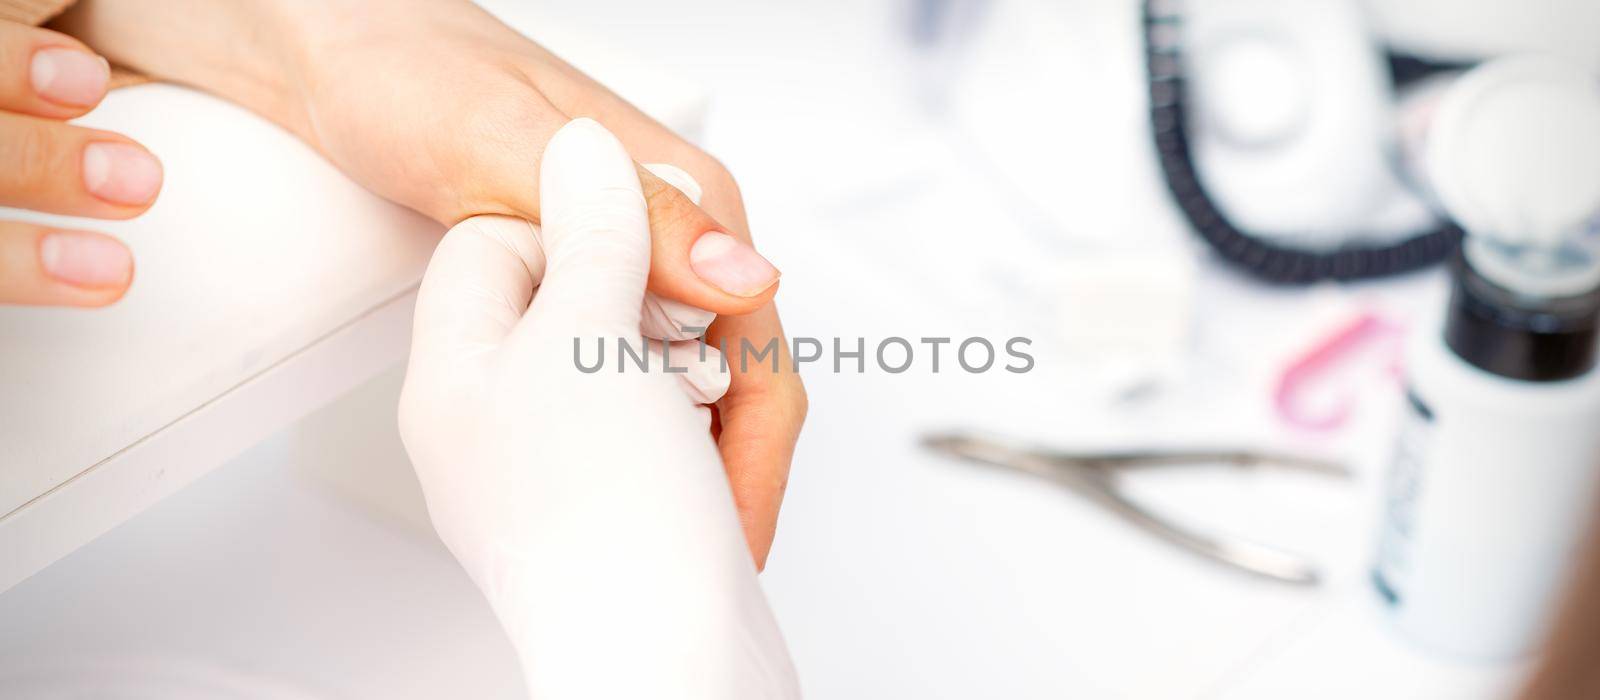 The manicurist holds the female thumb during a manicure procedure in the nail salon. by okskukuruza